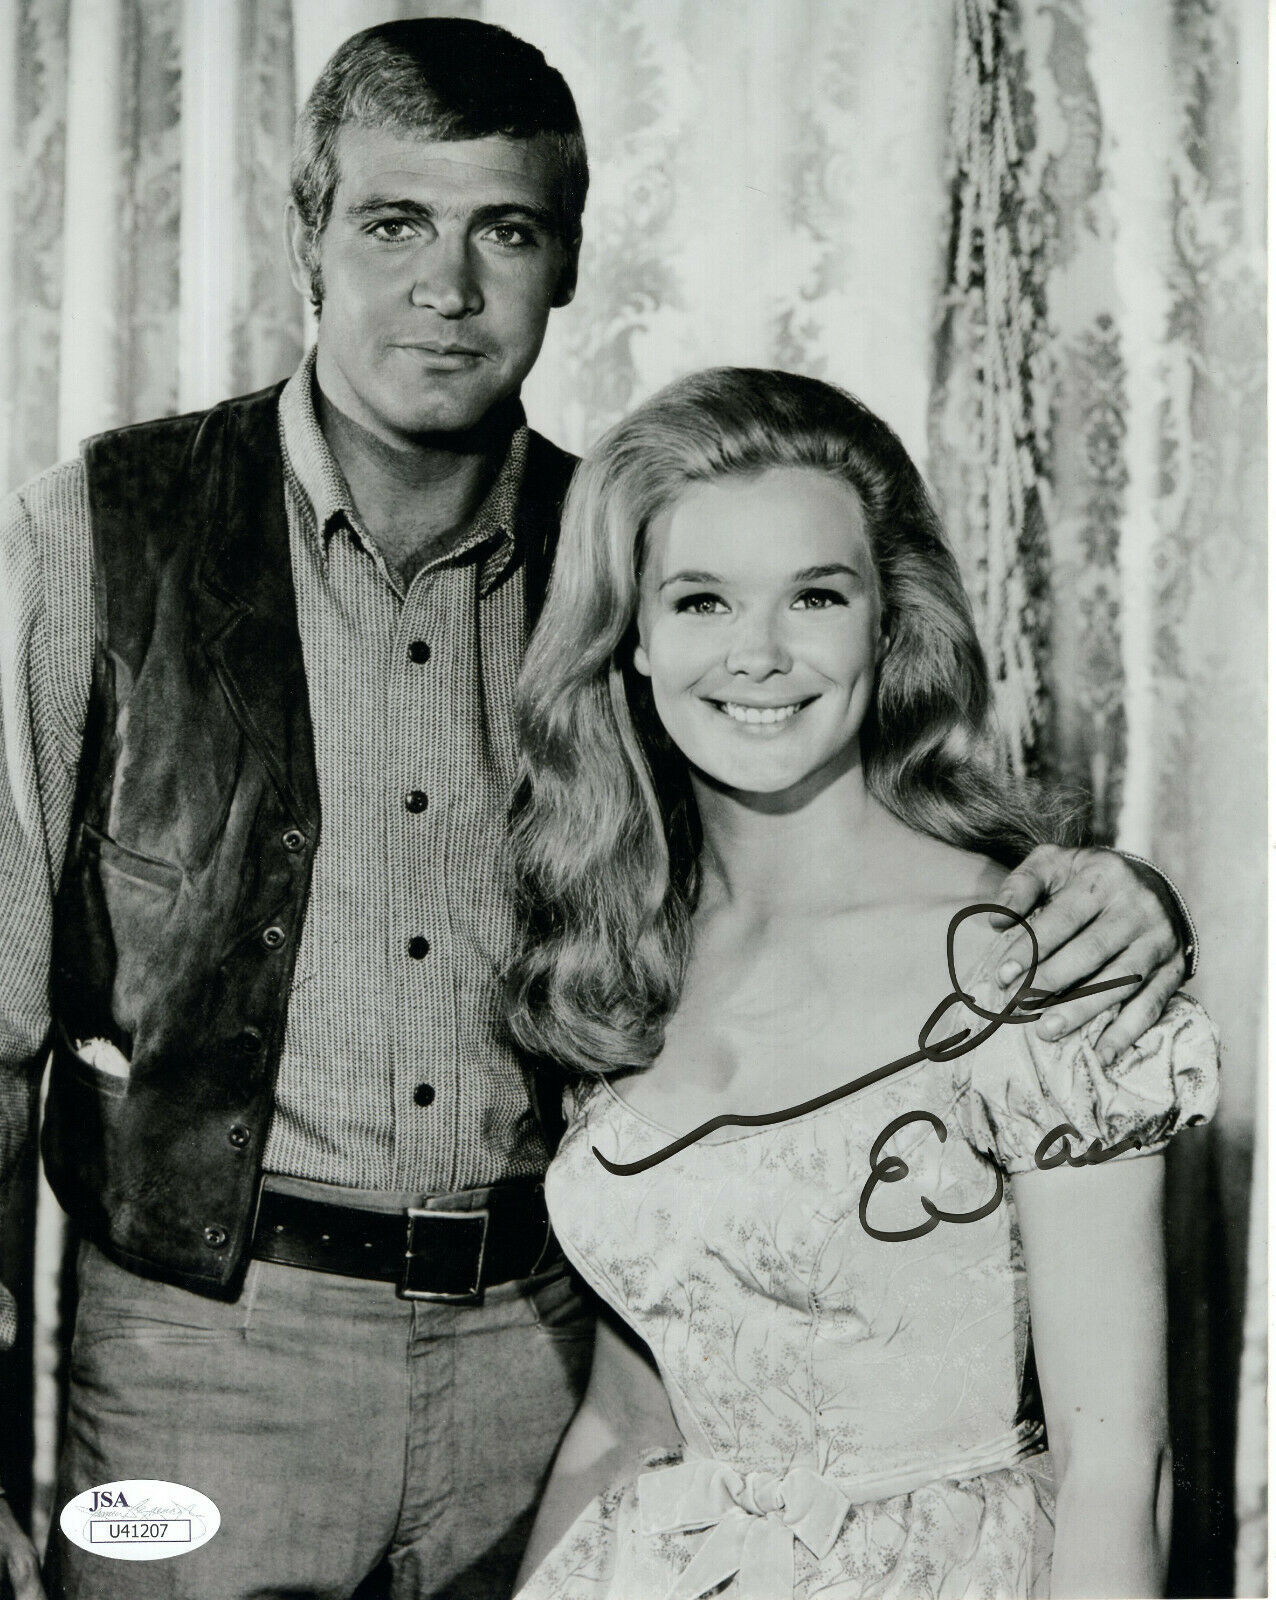 Linda Evans Hand Signed 8x10 Photo Awesome Pose With Lee Majors Jsa